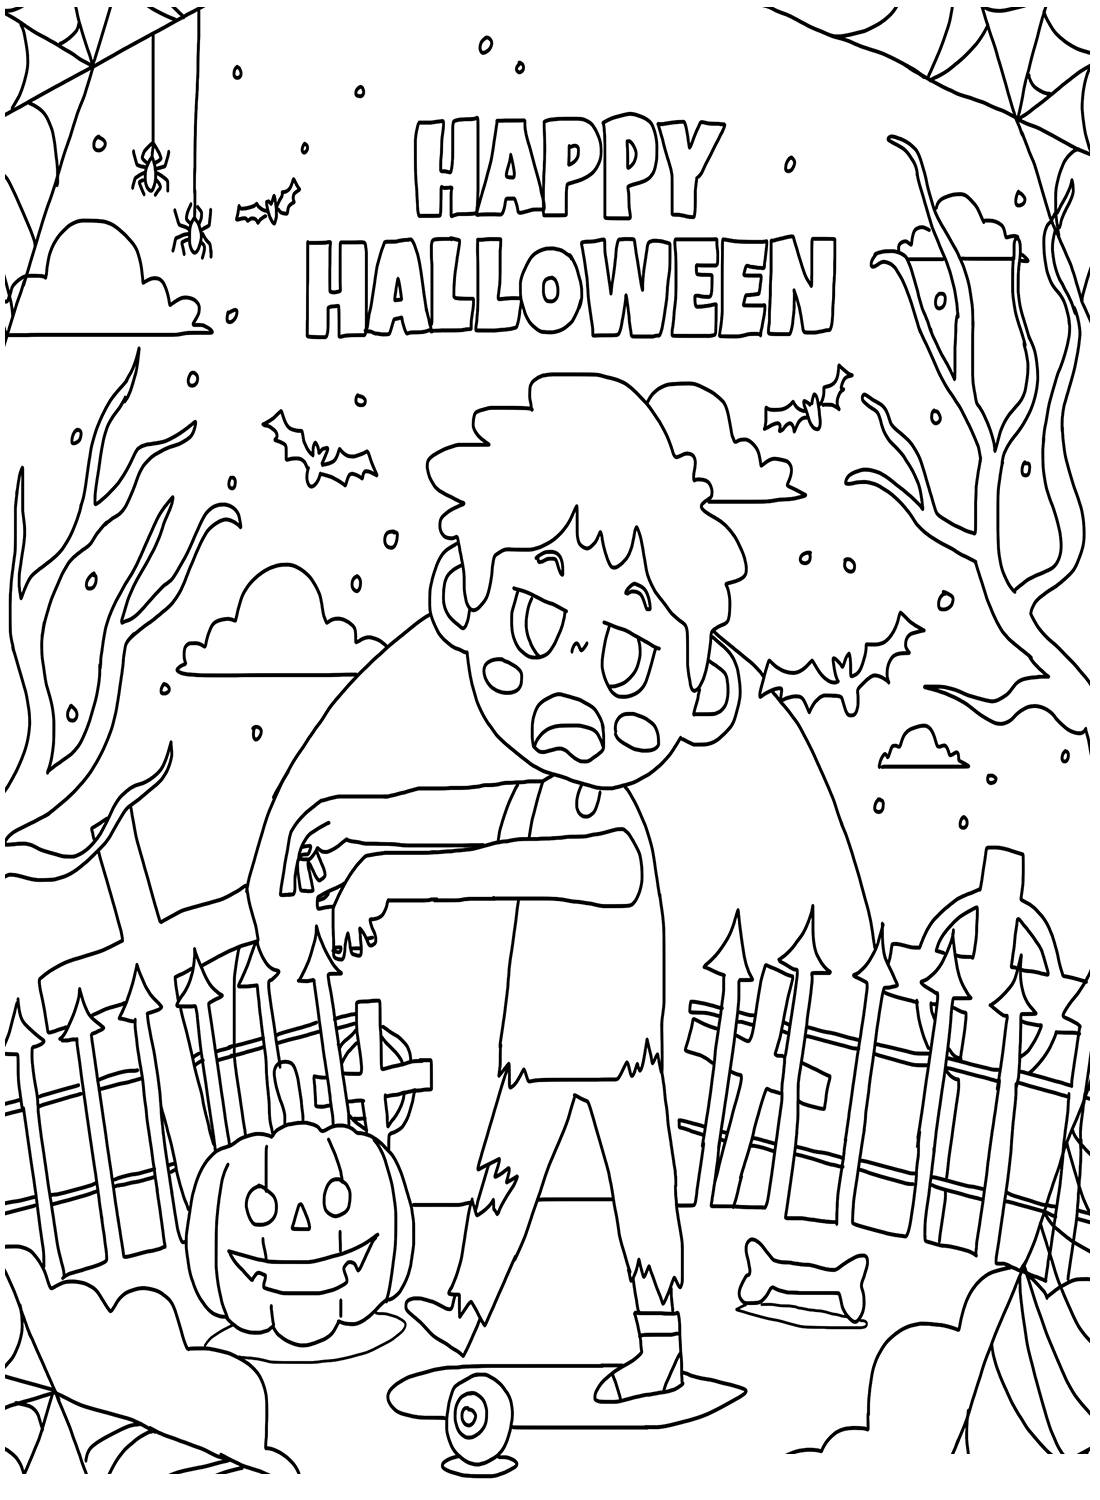 Coloring Pages Happy Halloween from Happy Halloween